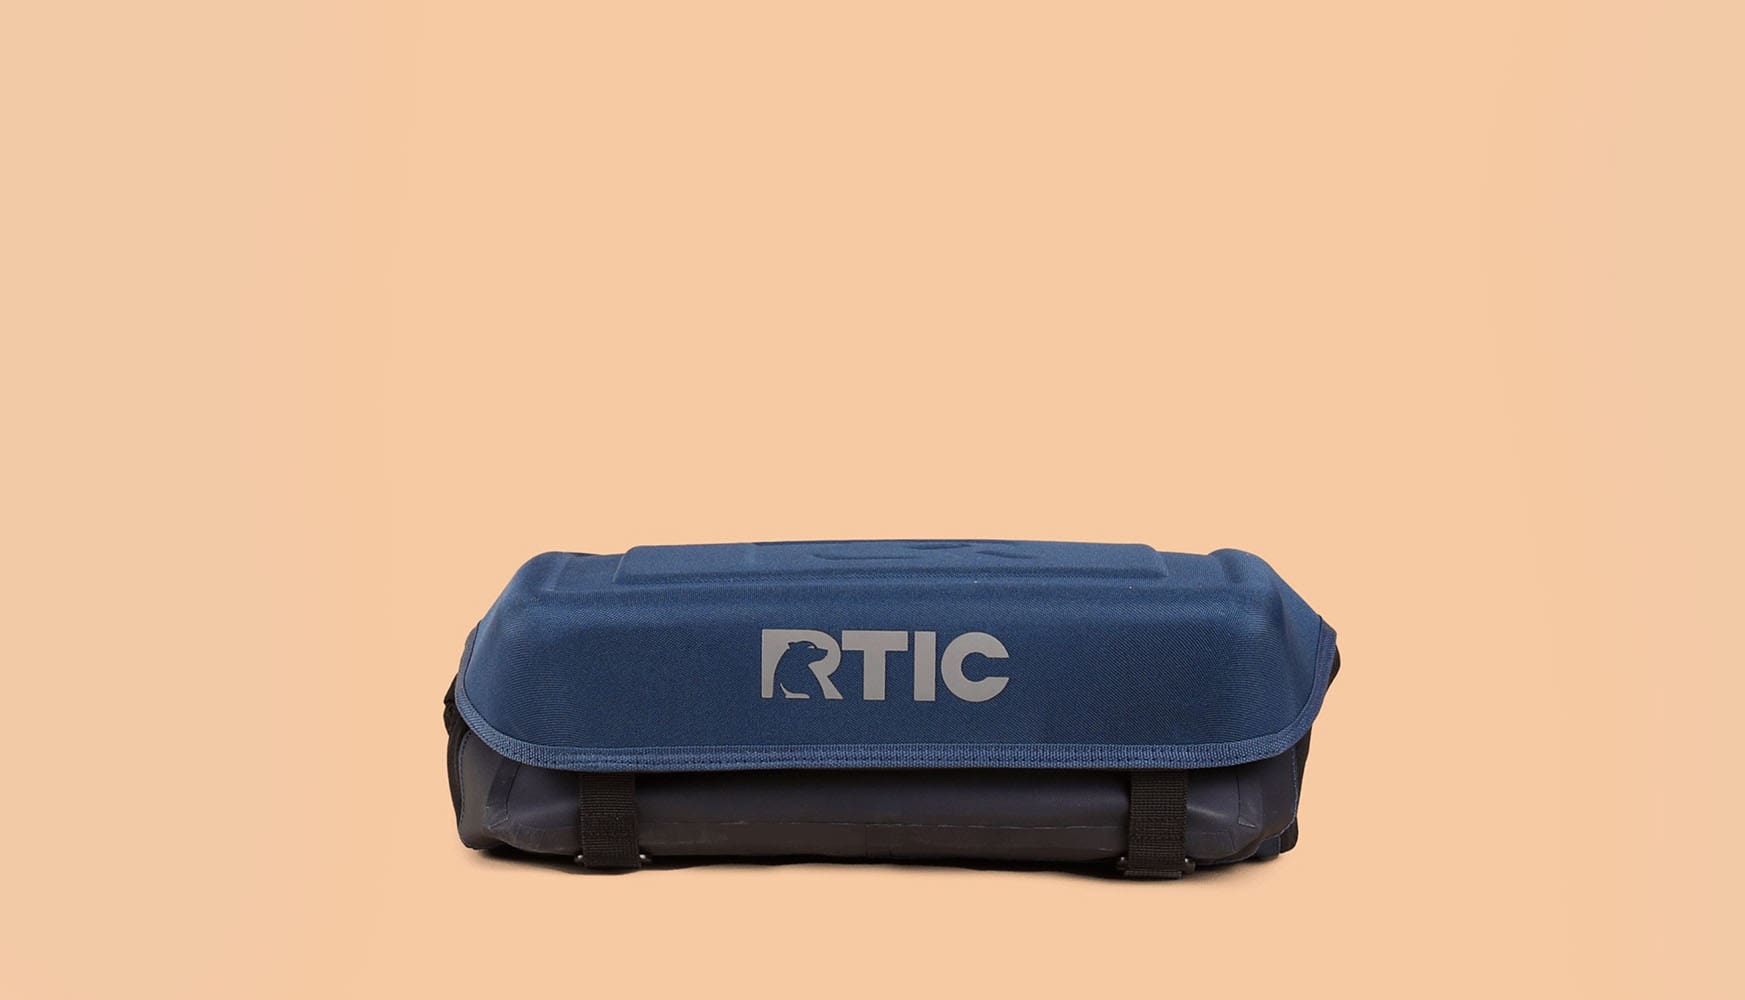 RTIC Soft Pack Cooler Demo & Features 